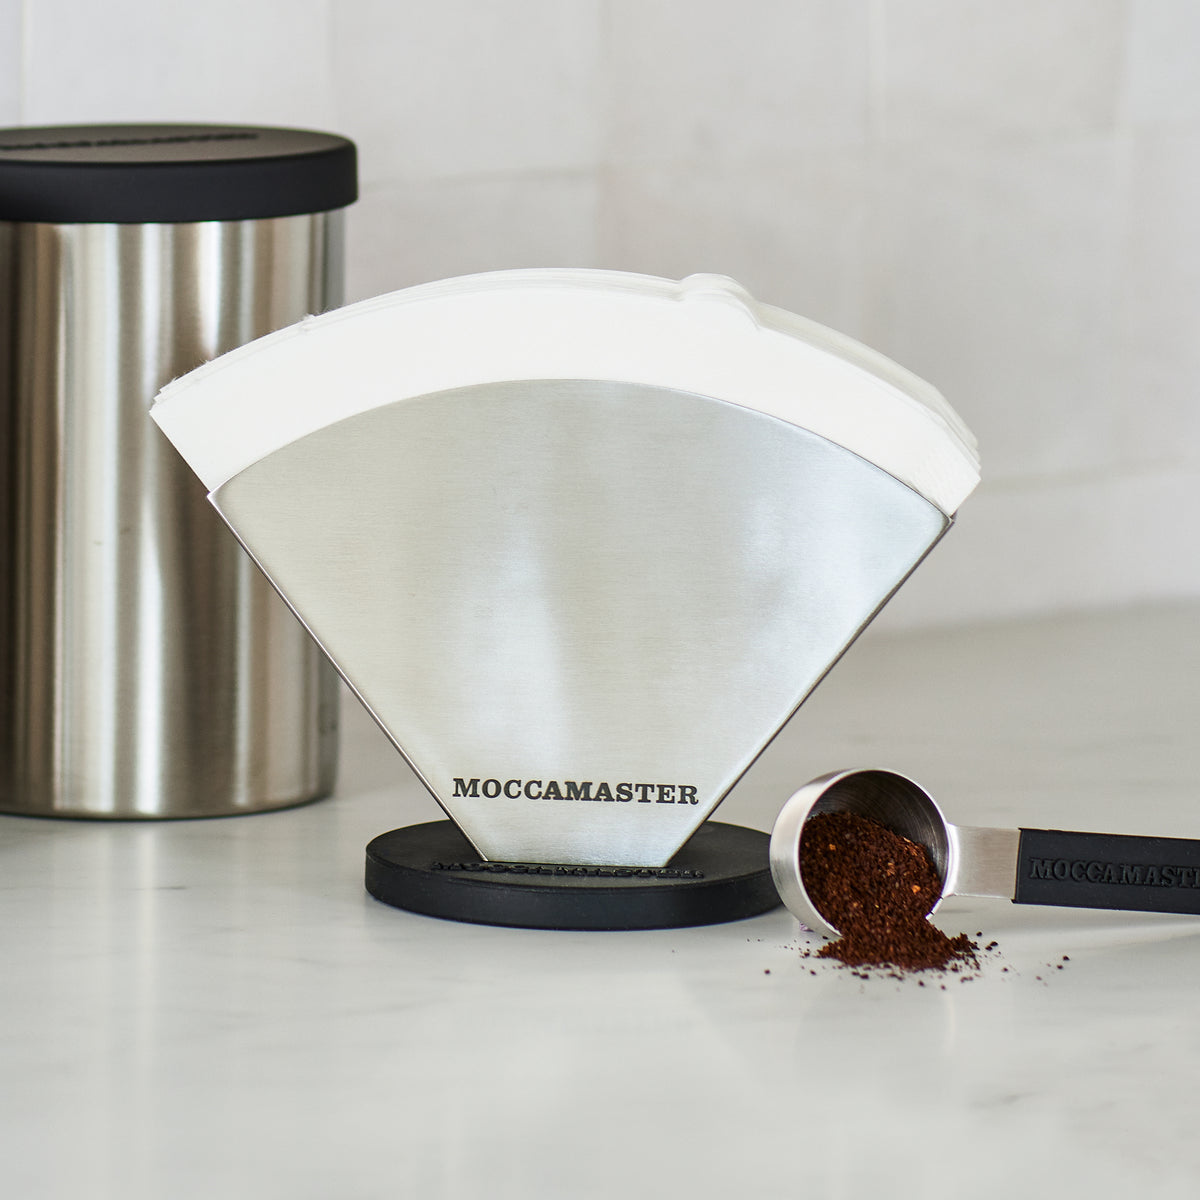 Close up shot of Moccamaster stainless steel accessories, including a coffee bean canister, paper filter holder, and coffee ground scoop.